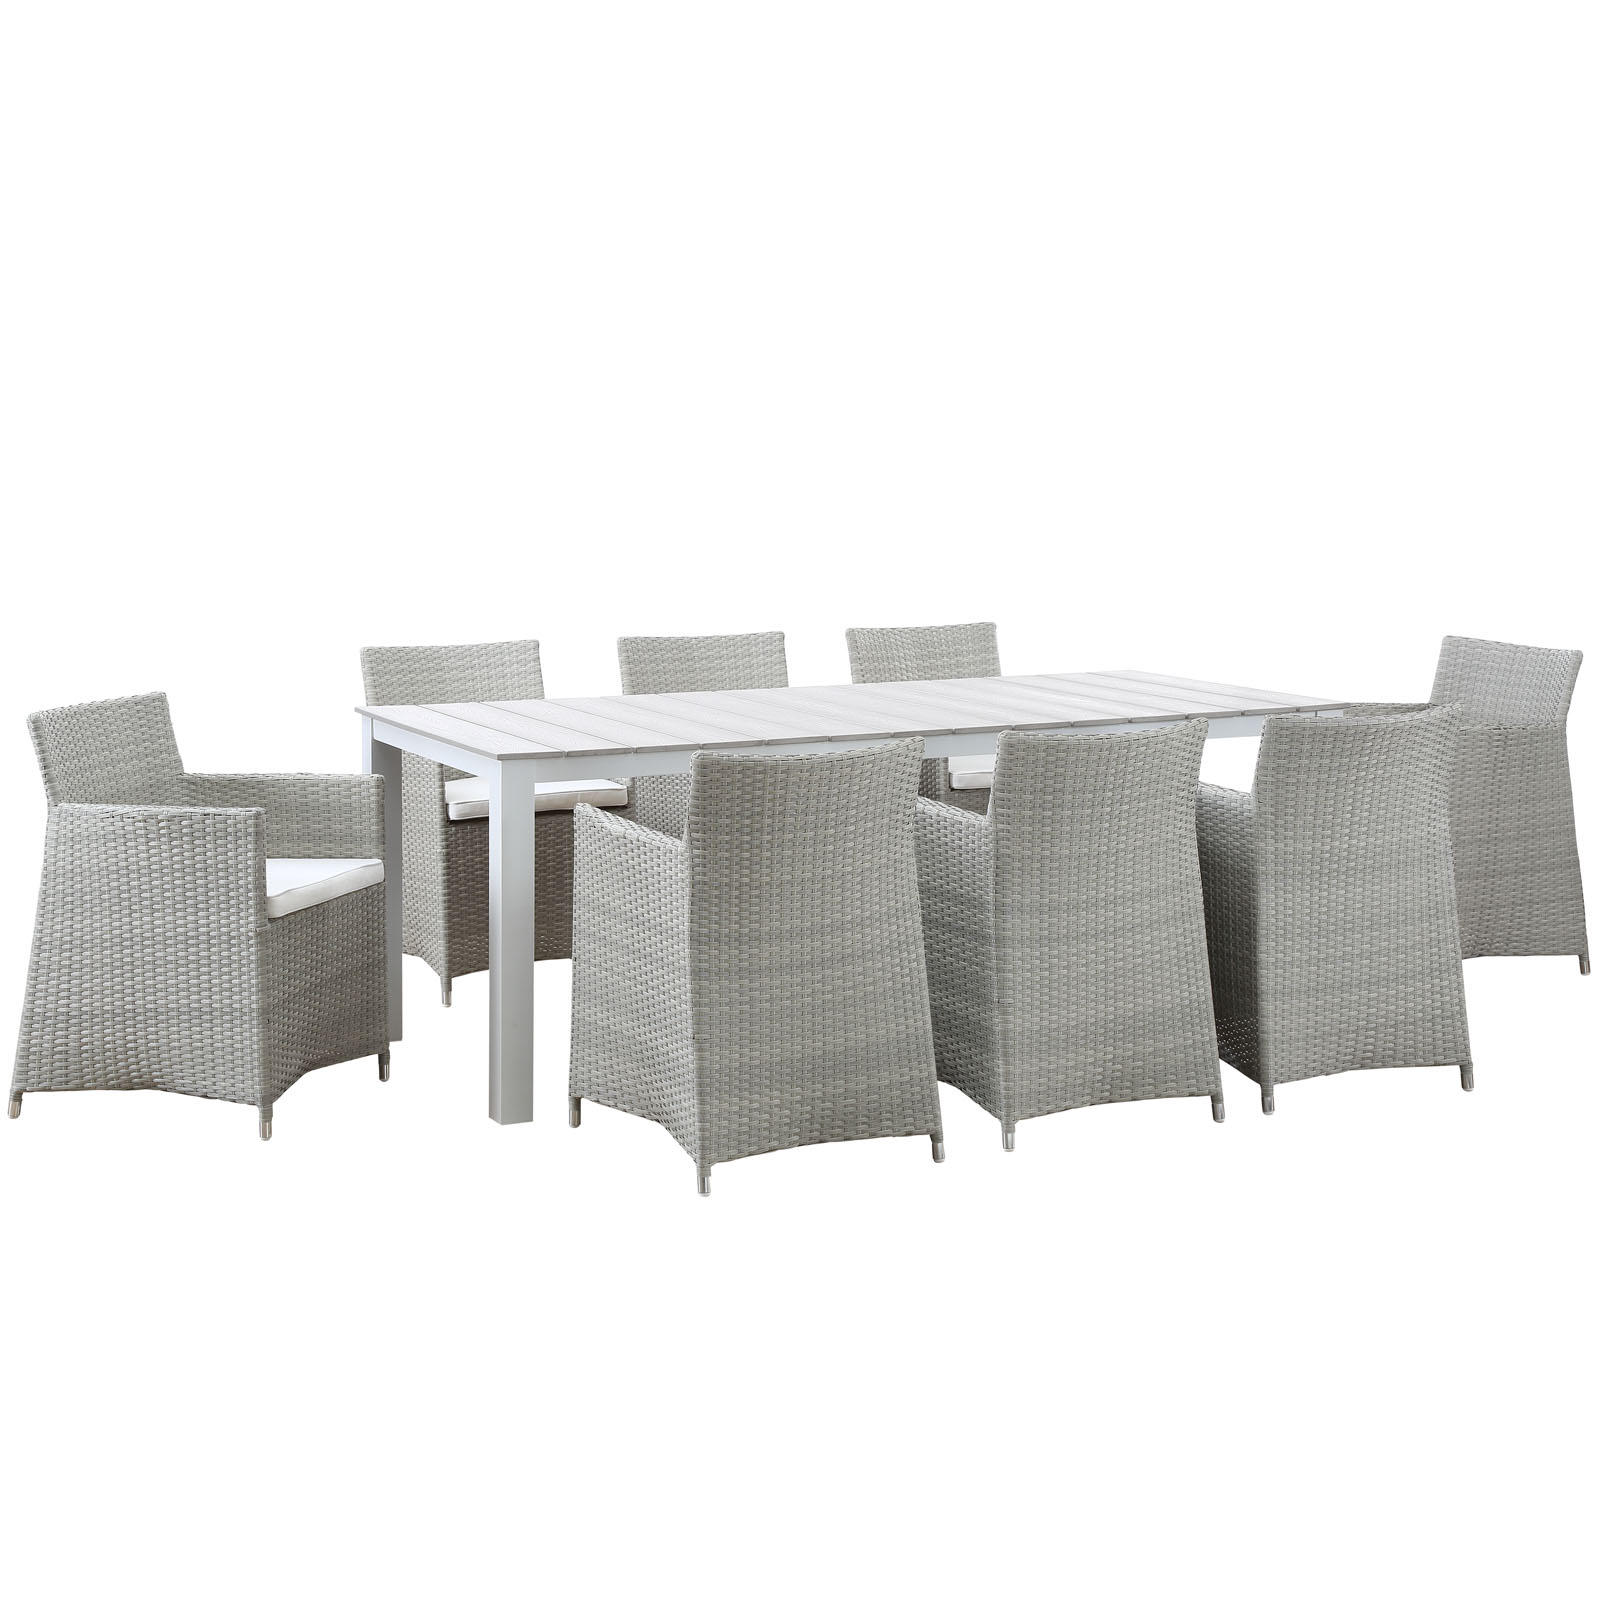 Modway Junction 9 Piece Outdoor Patio Dining Set in Gray White - image 2 of 7